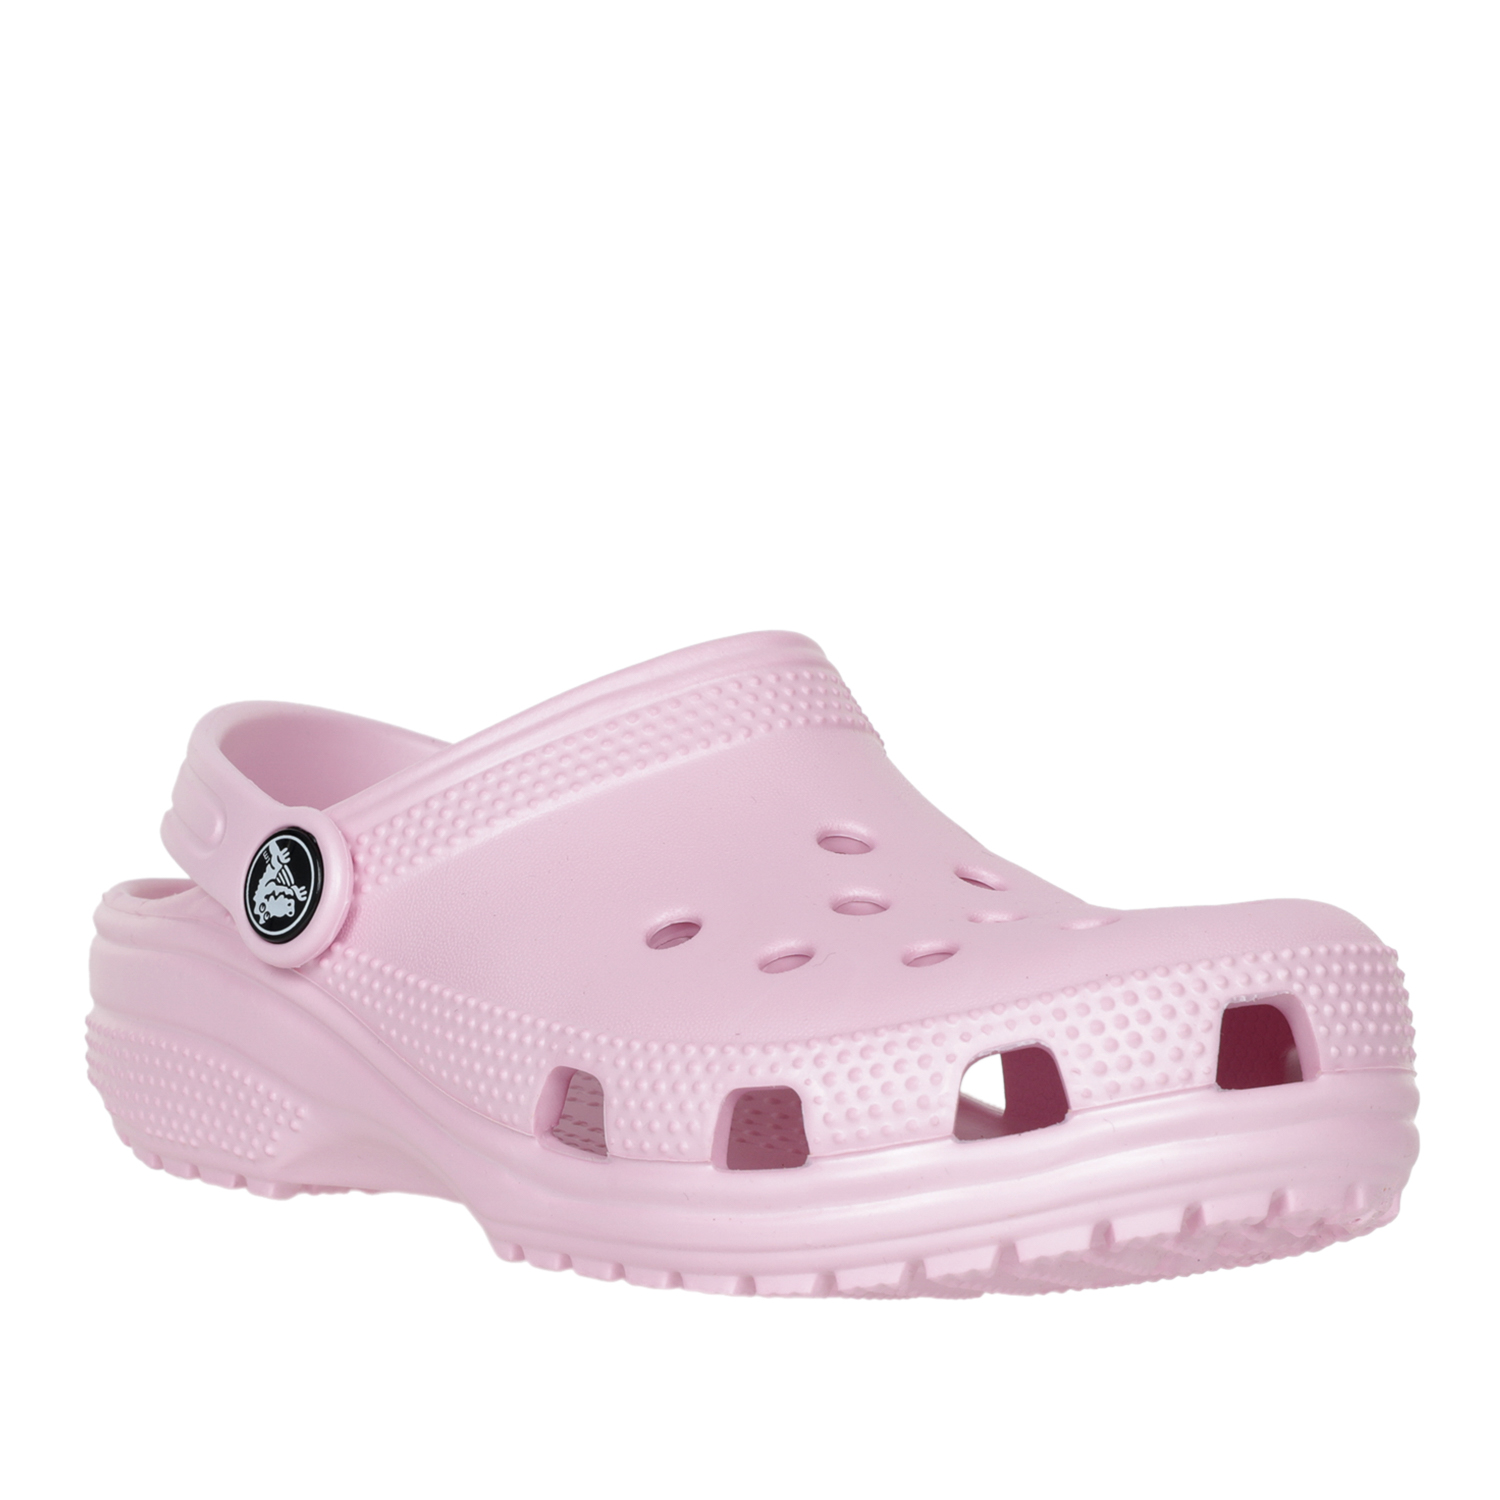 Crocs - Shine Bright like a 💎 Don't miss this clog, it's